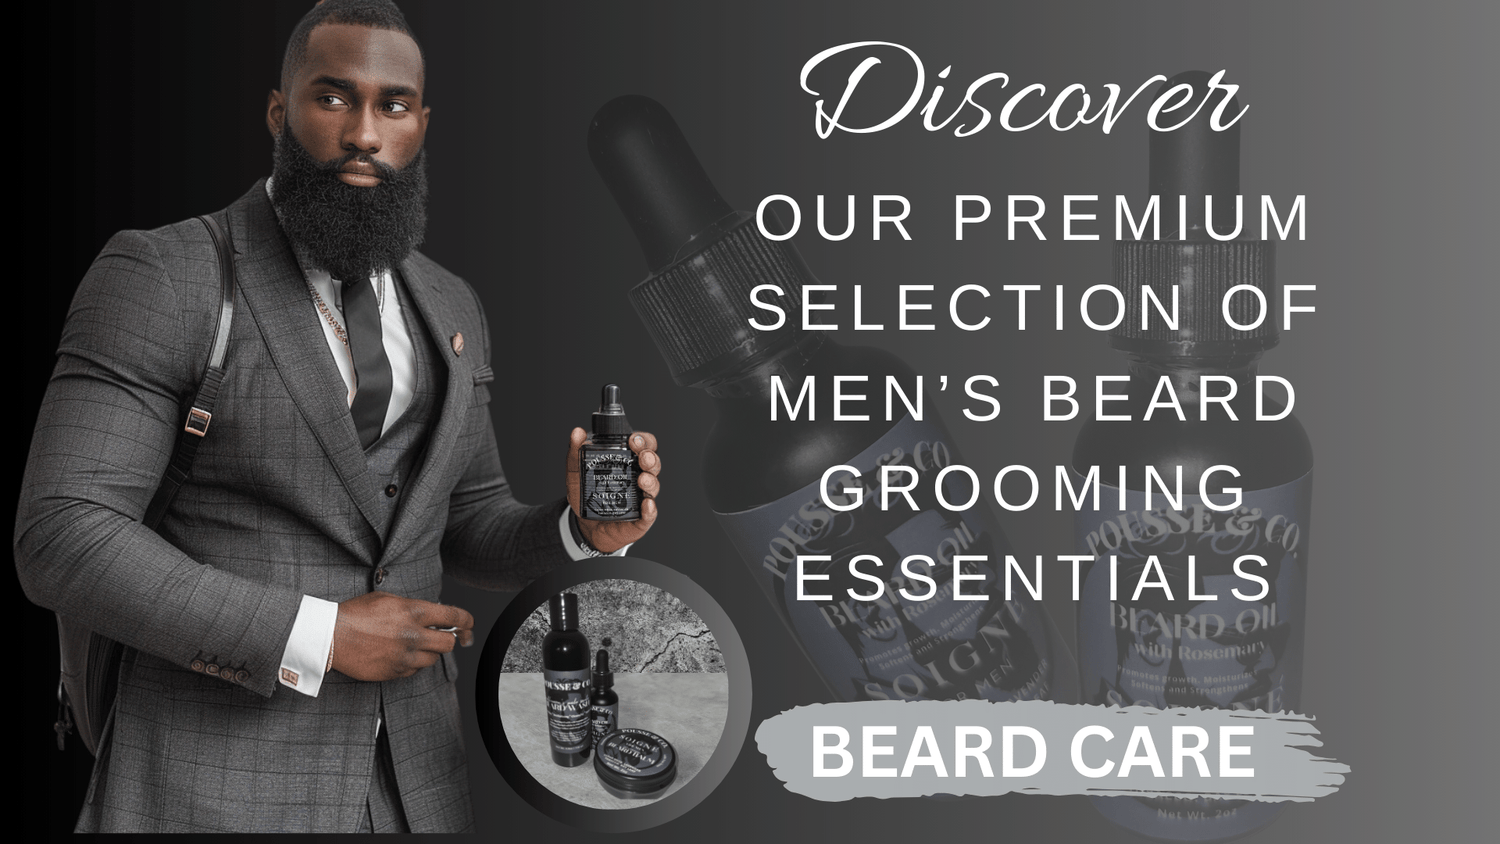 A sophisticated arrangement of Pousse & Co. men's grooming products, including a rich, black-colored beard oil in a dropper bottle. The products are tastefully presented on a dark, textured surface, highlighting their premium quality and the brand's commitment to natural, effective grooming essentials for men. 